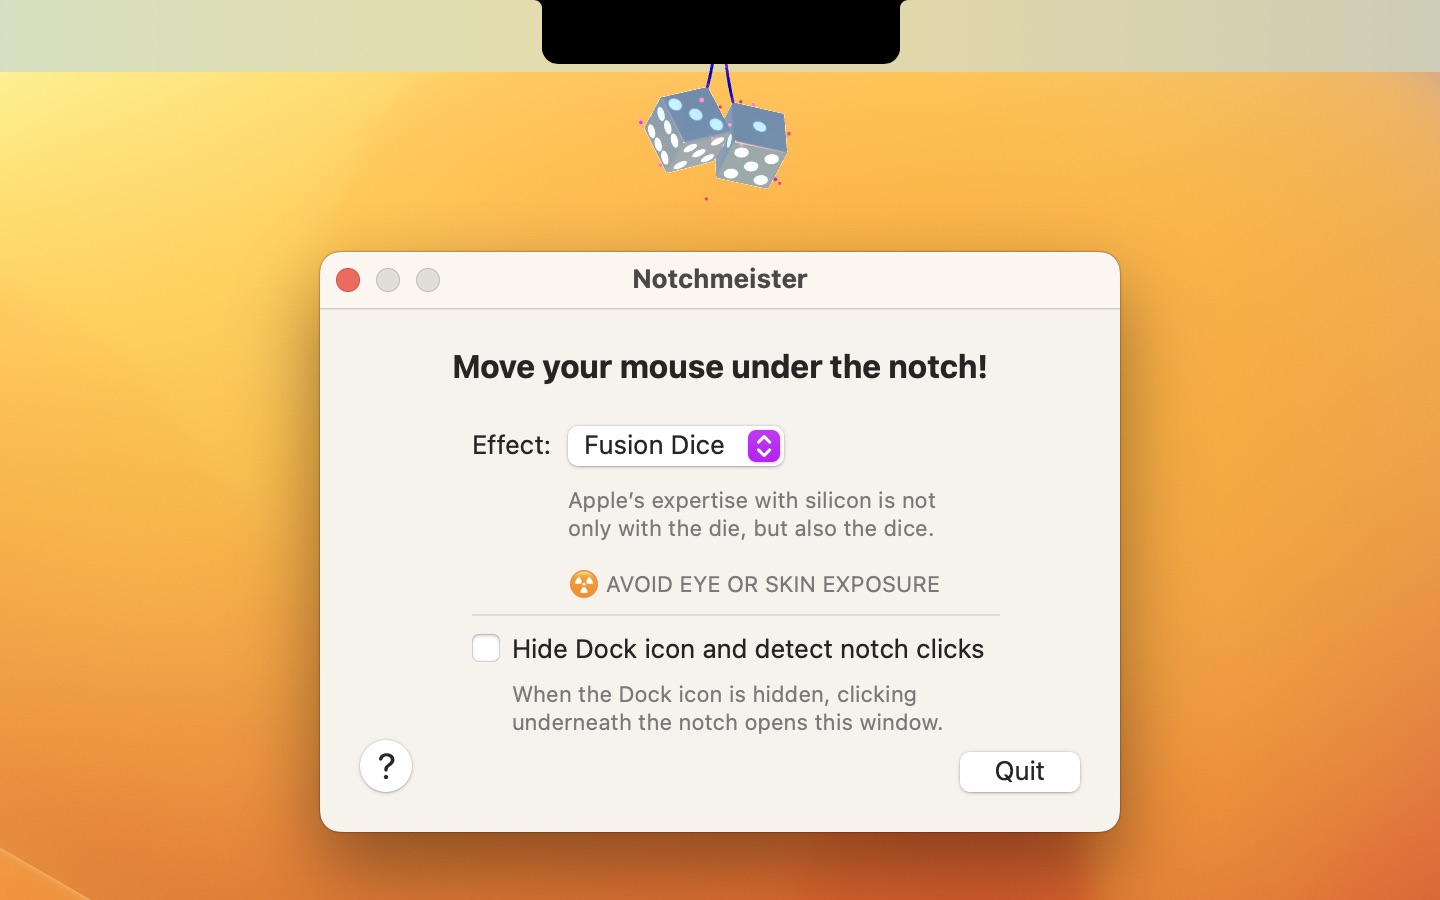 We’re proud to announce that version 1.0.4 of Notchmeister is now available to download. And with it comes a revolutionary new feature called Fu